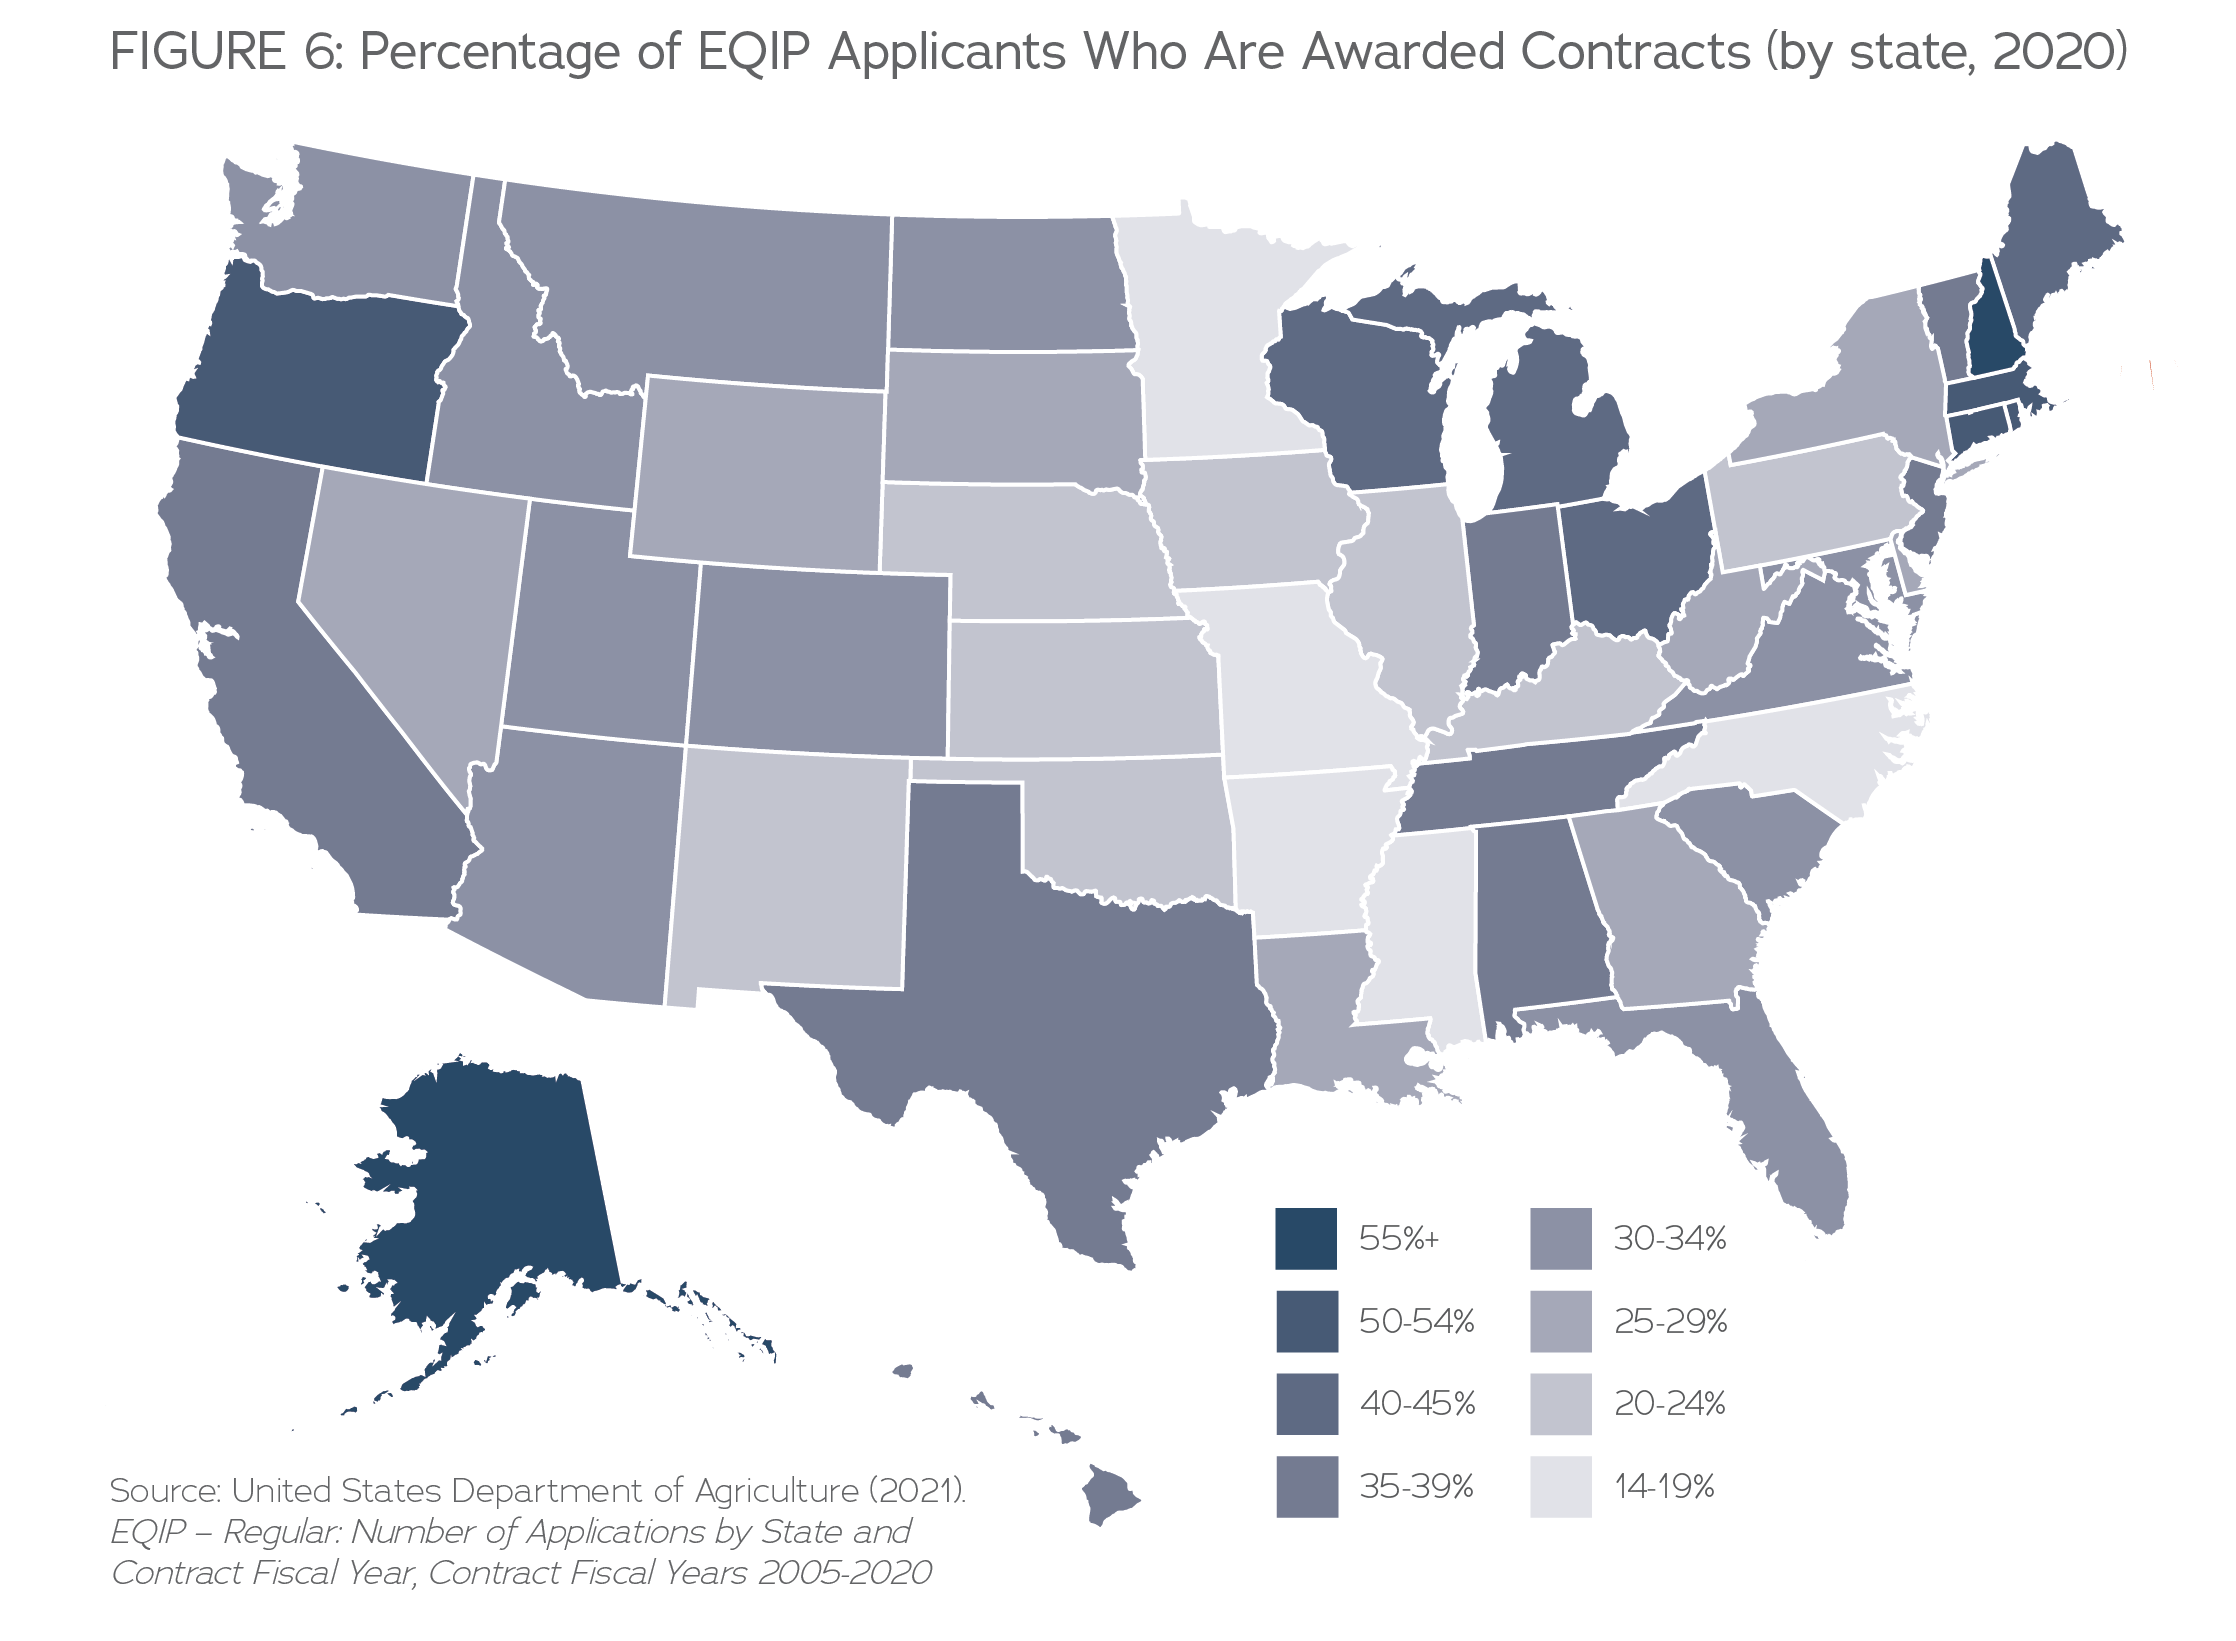 Percentage of EQIP Applicants who are awarded contracts